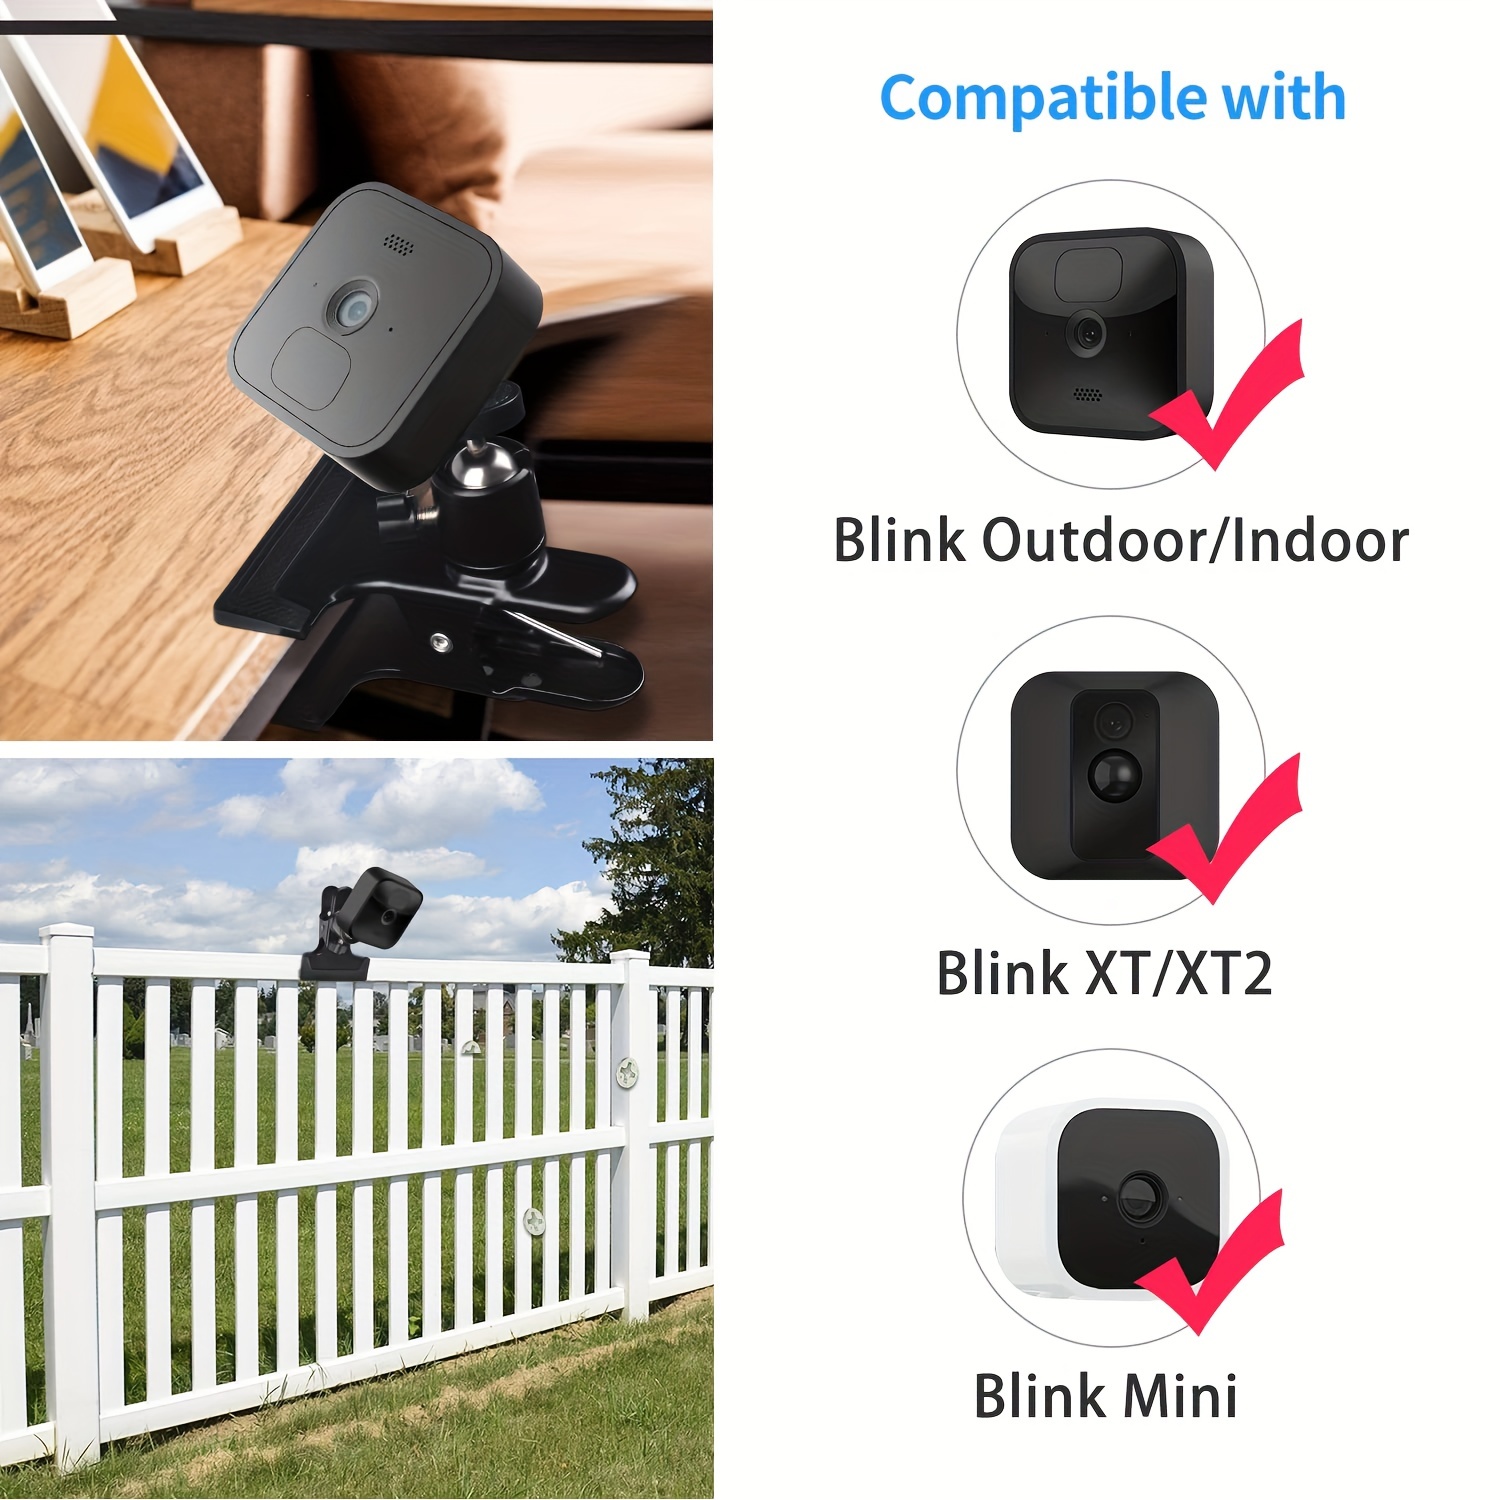 Blink Camera Metal Clip Holder For Blink Outdoor/Indoor Camera/Blink XT/  XT2, Blink Mini, Weatherproof, No Drilling Required, No Damage To Your  Furnit